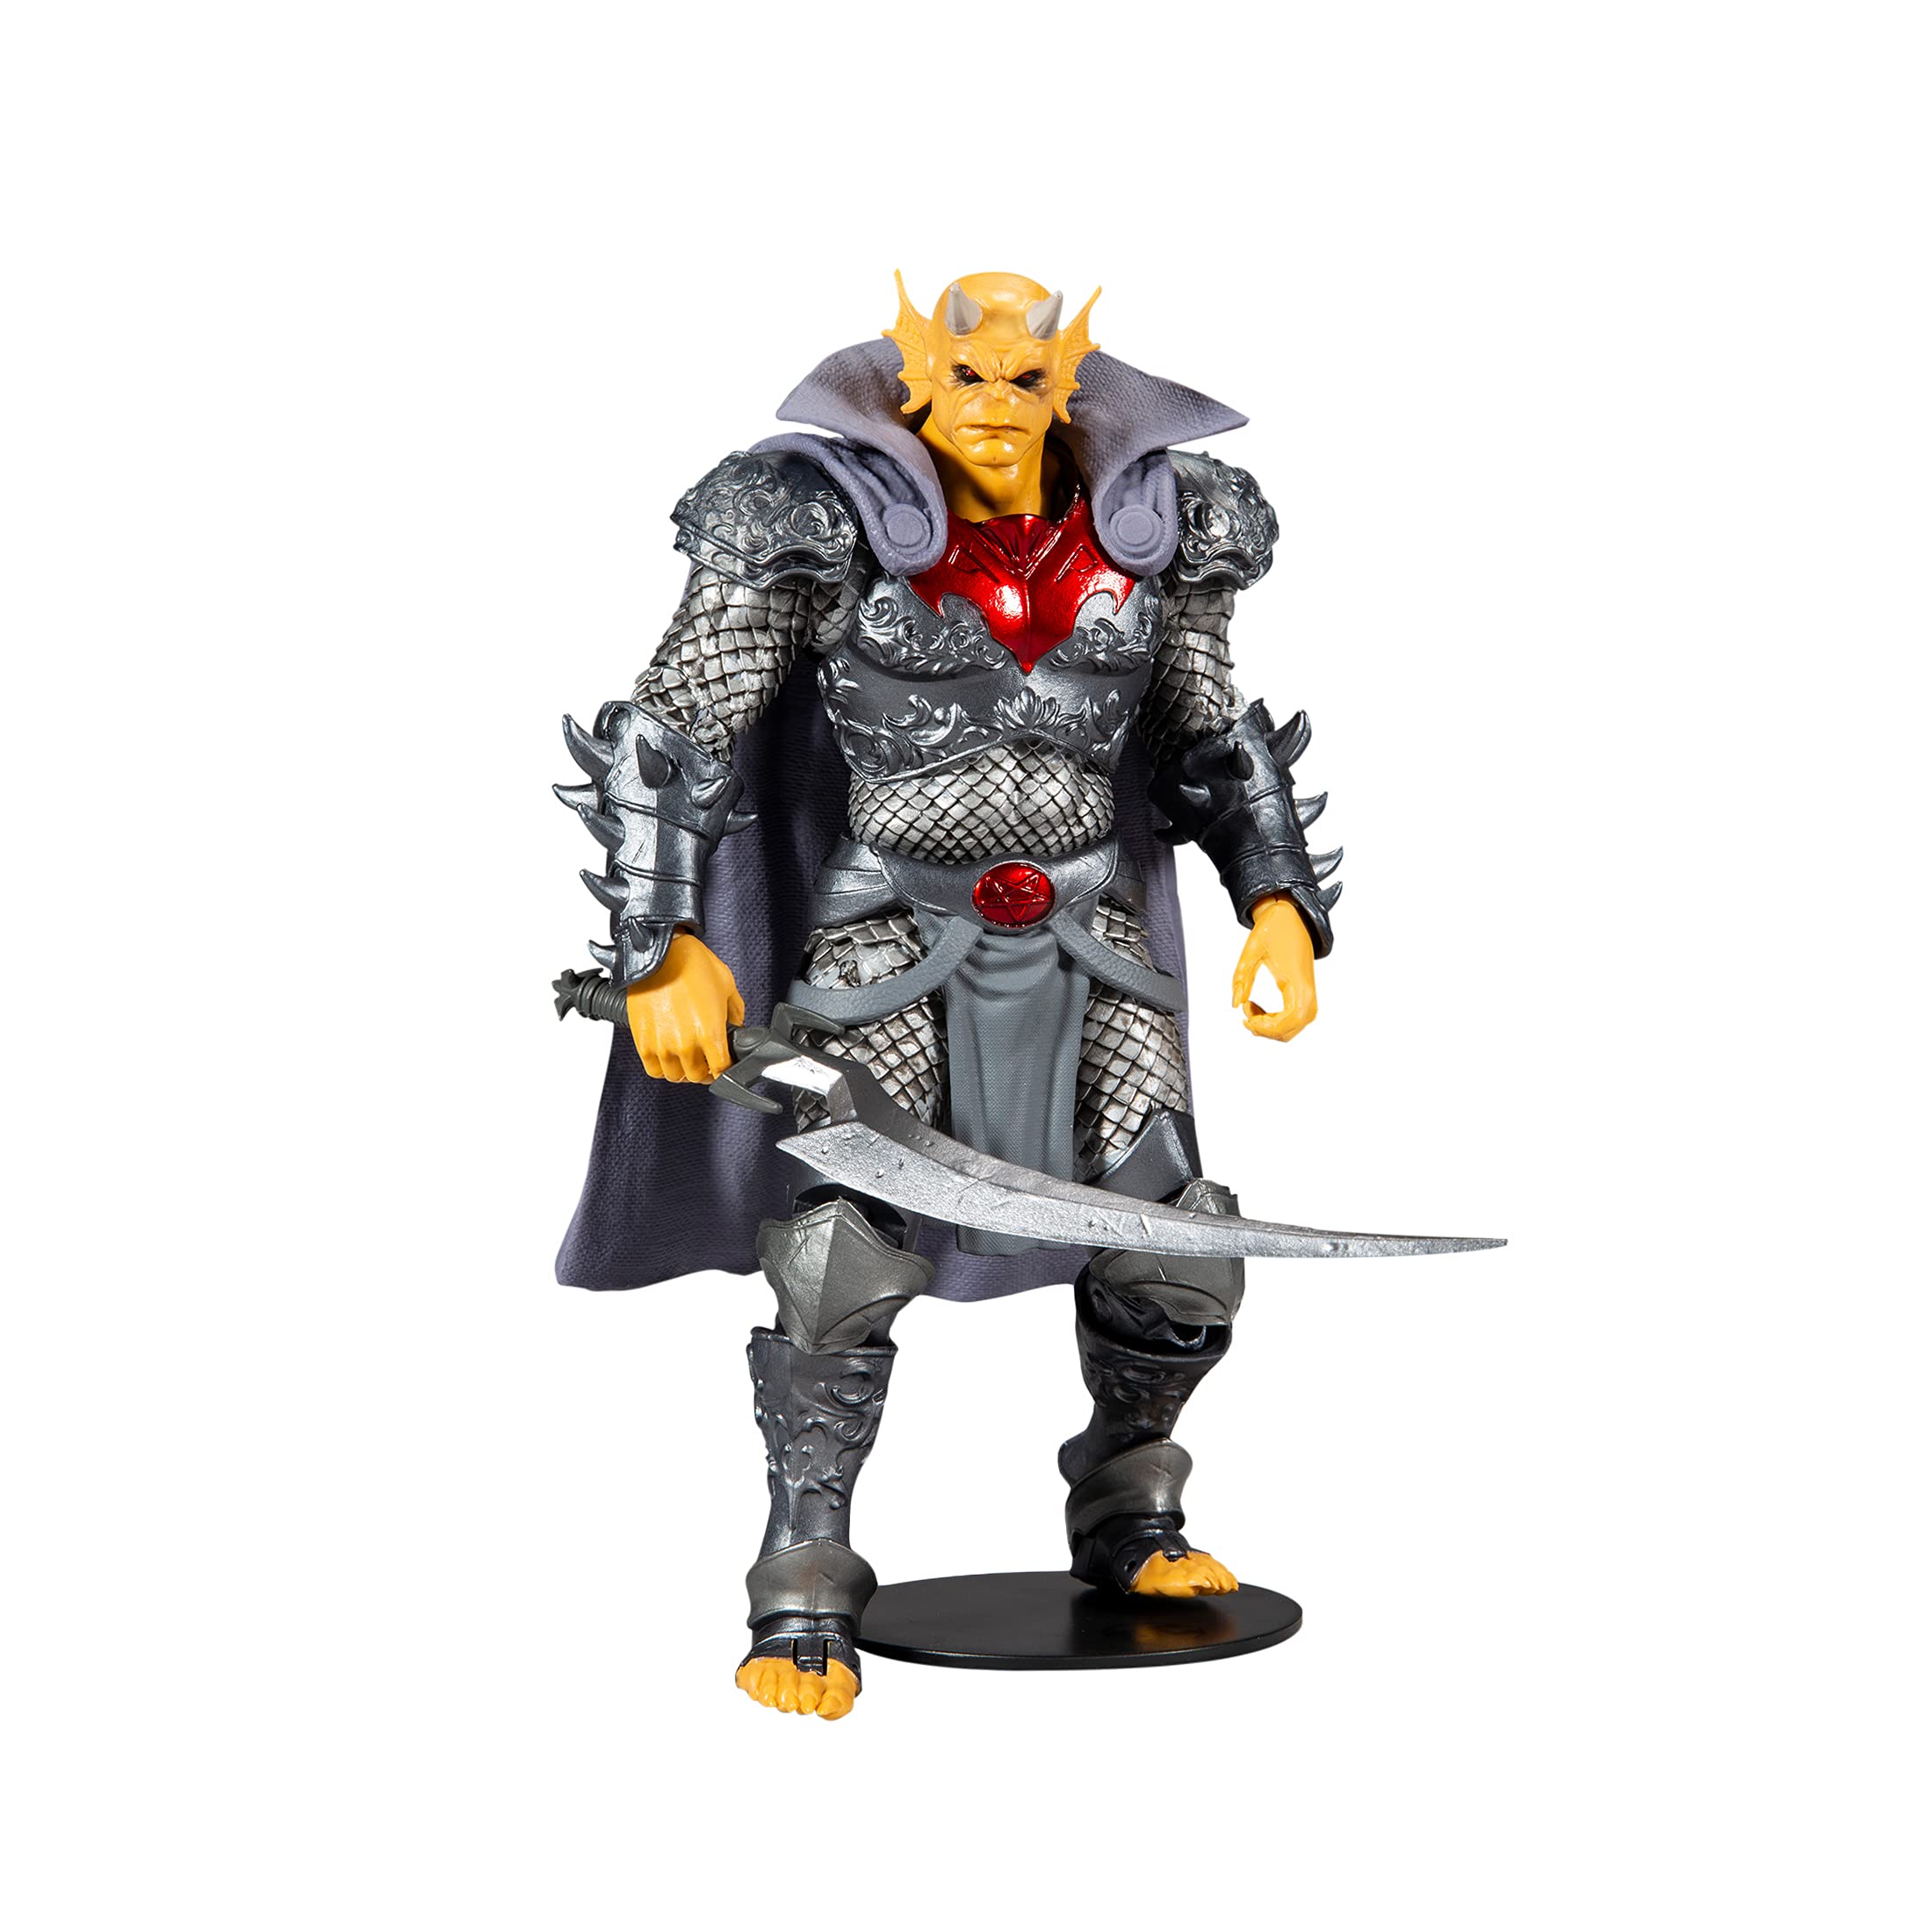 McFarlane Toys DC Multiverse The Demon (Demon Knights) 7" Action Figure with Accessories $7.99 at Amazon